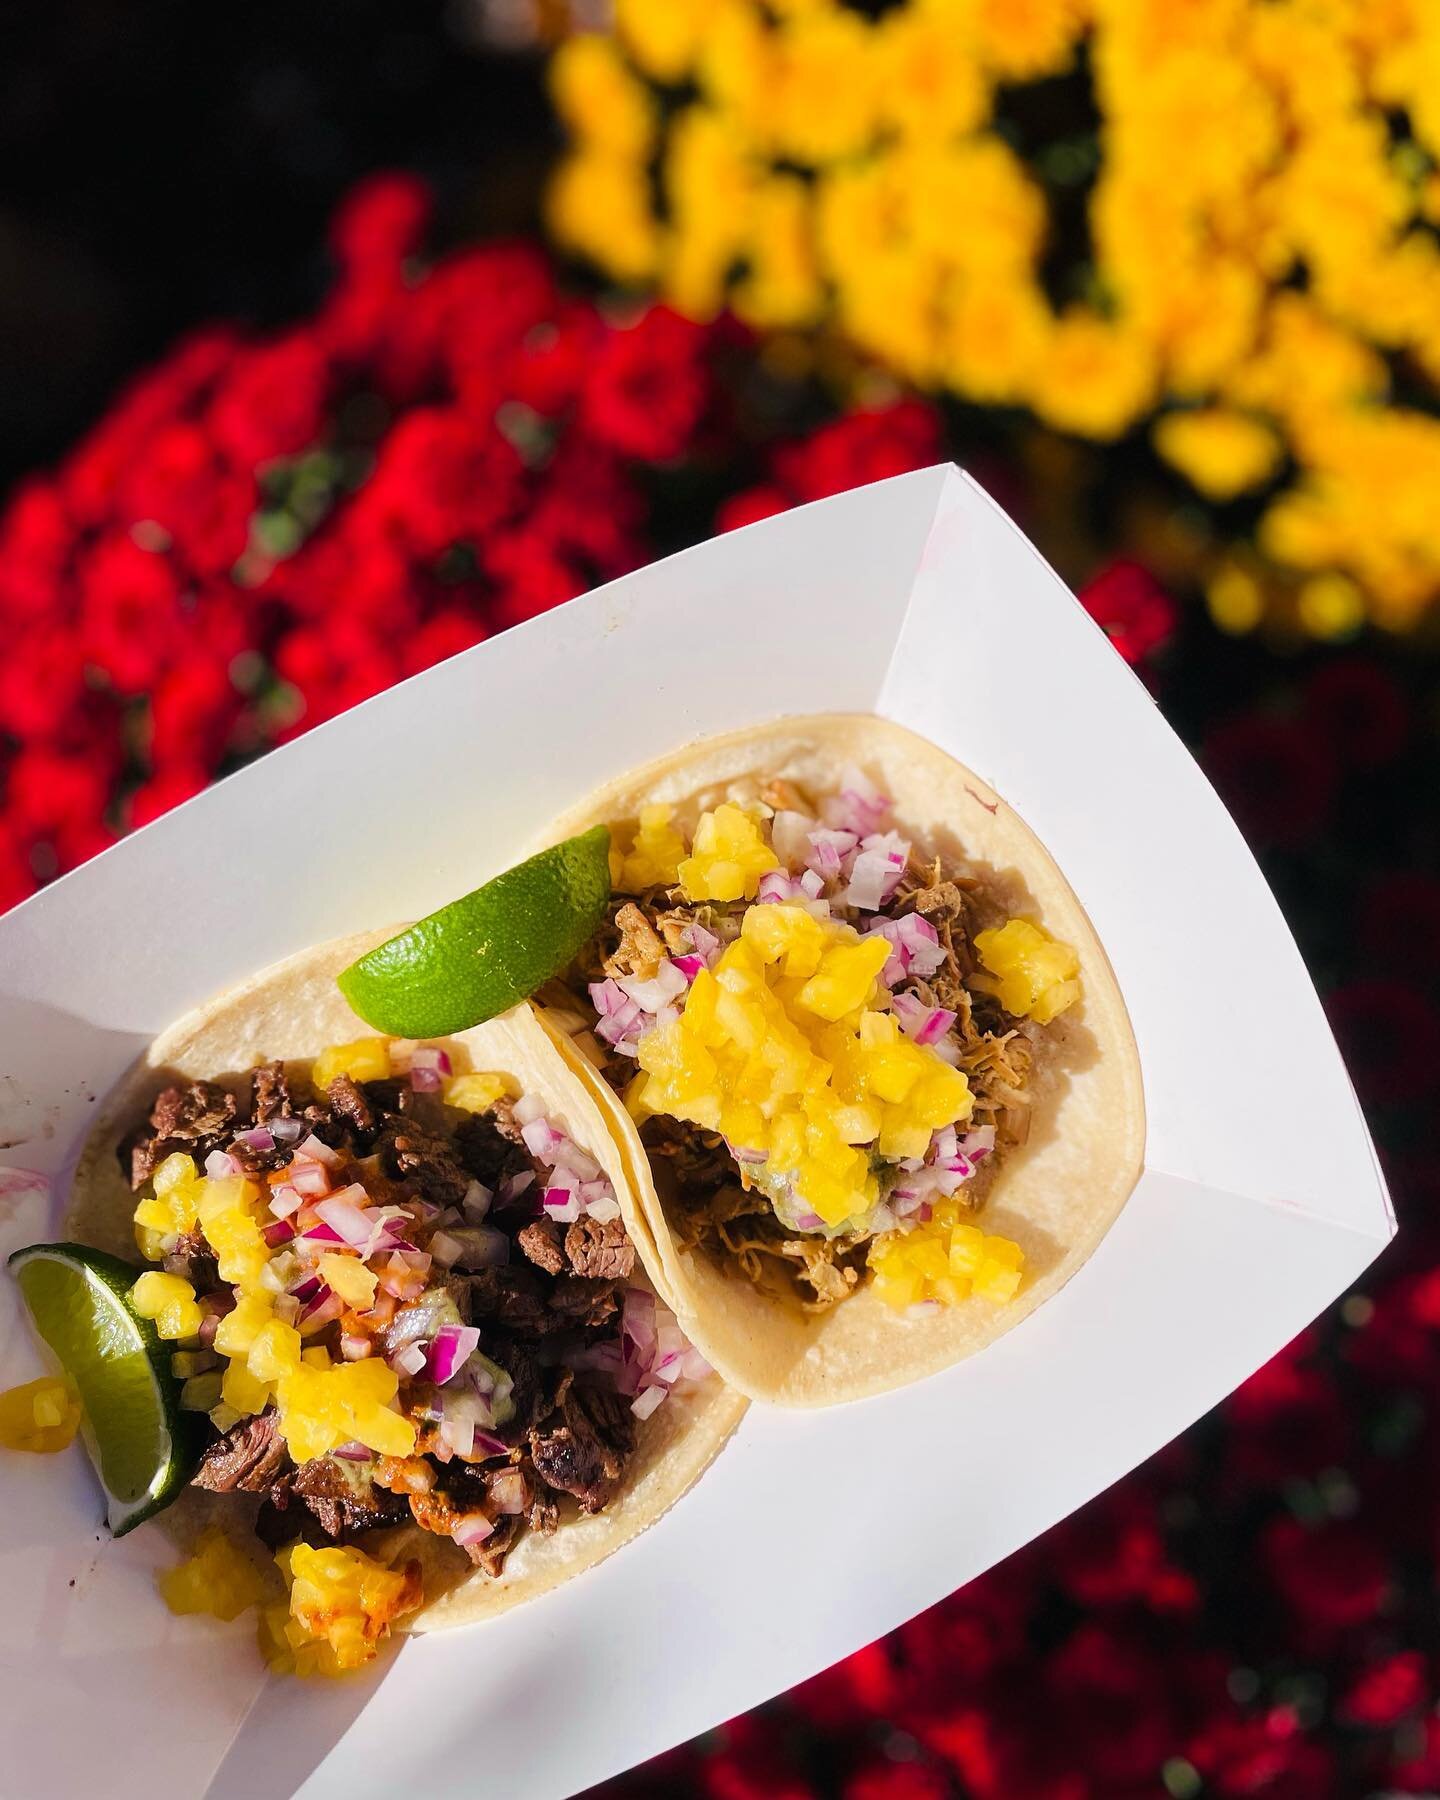 ICYMI, @cultro_pvd is parked downtown *TODAY* from 11-3 at Grant&rsquo;s Block! 🌮🌮 Enjoy delicious tacos, arepas, rice bowls and more. (We dove into these chicken and steak tacos so feel grateful we took a quick pic before demolishing them.)